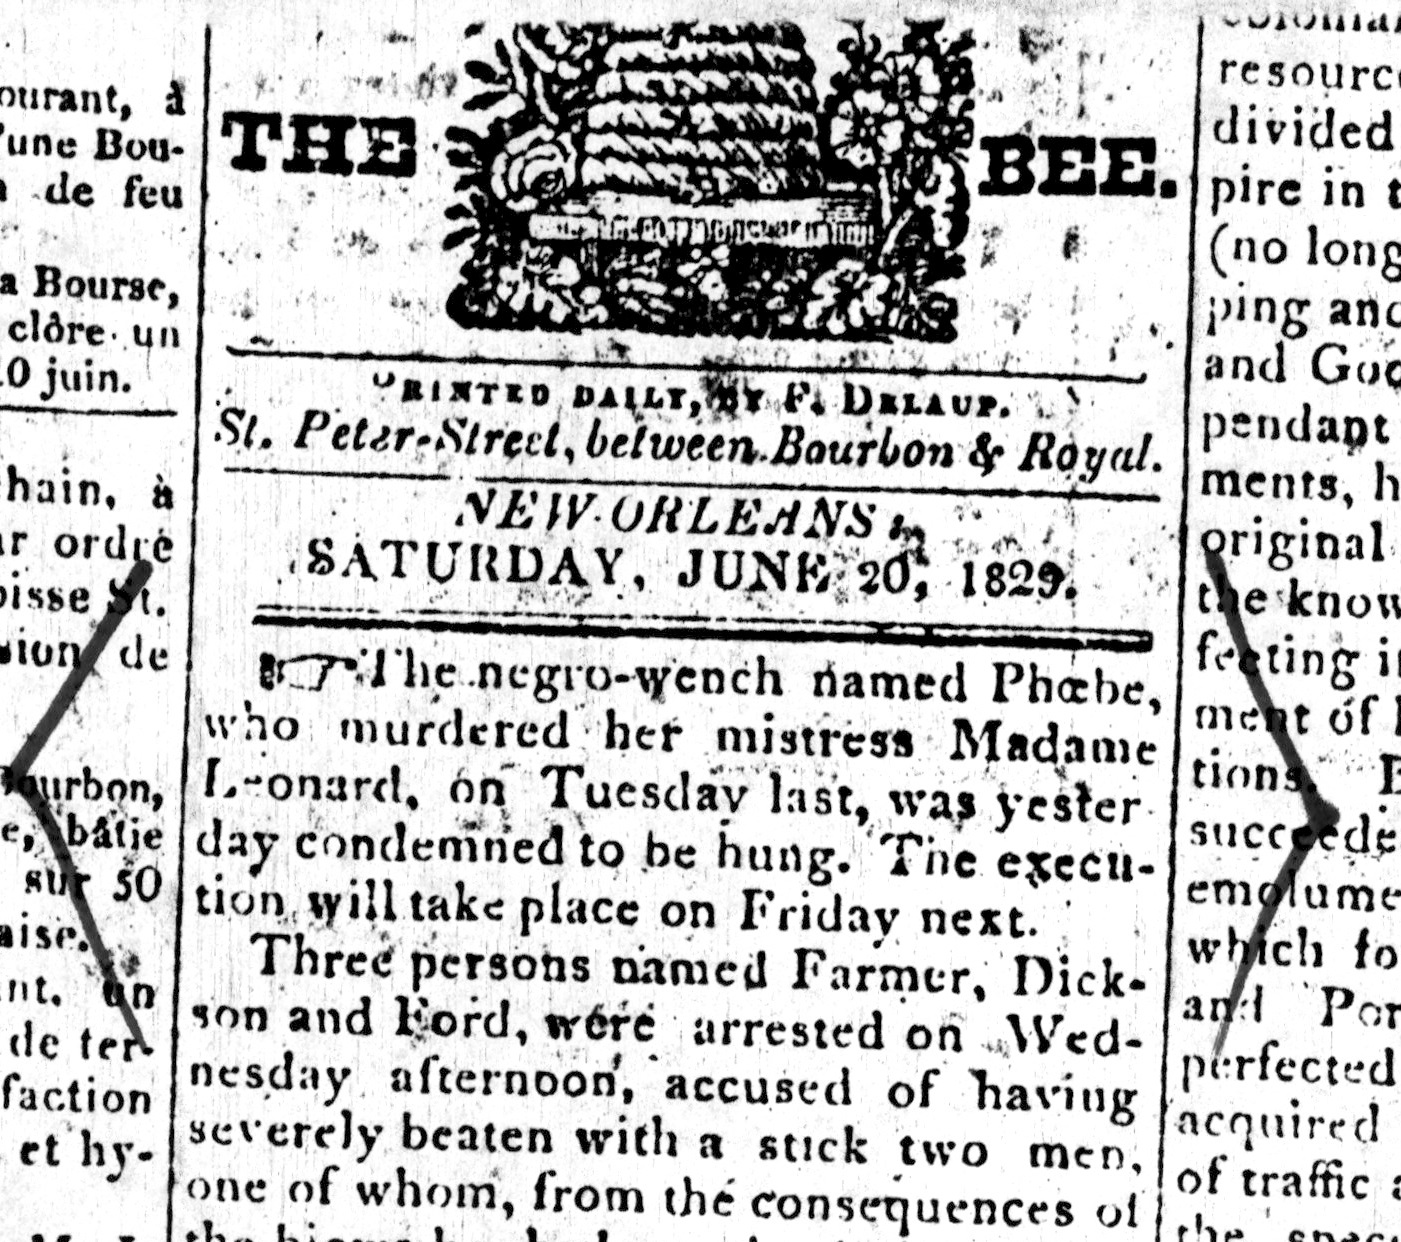 Second article from the 1829 New Orleans Bee which is one of the few known primary sources documenting the case.